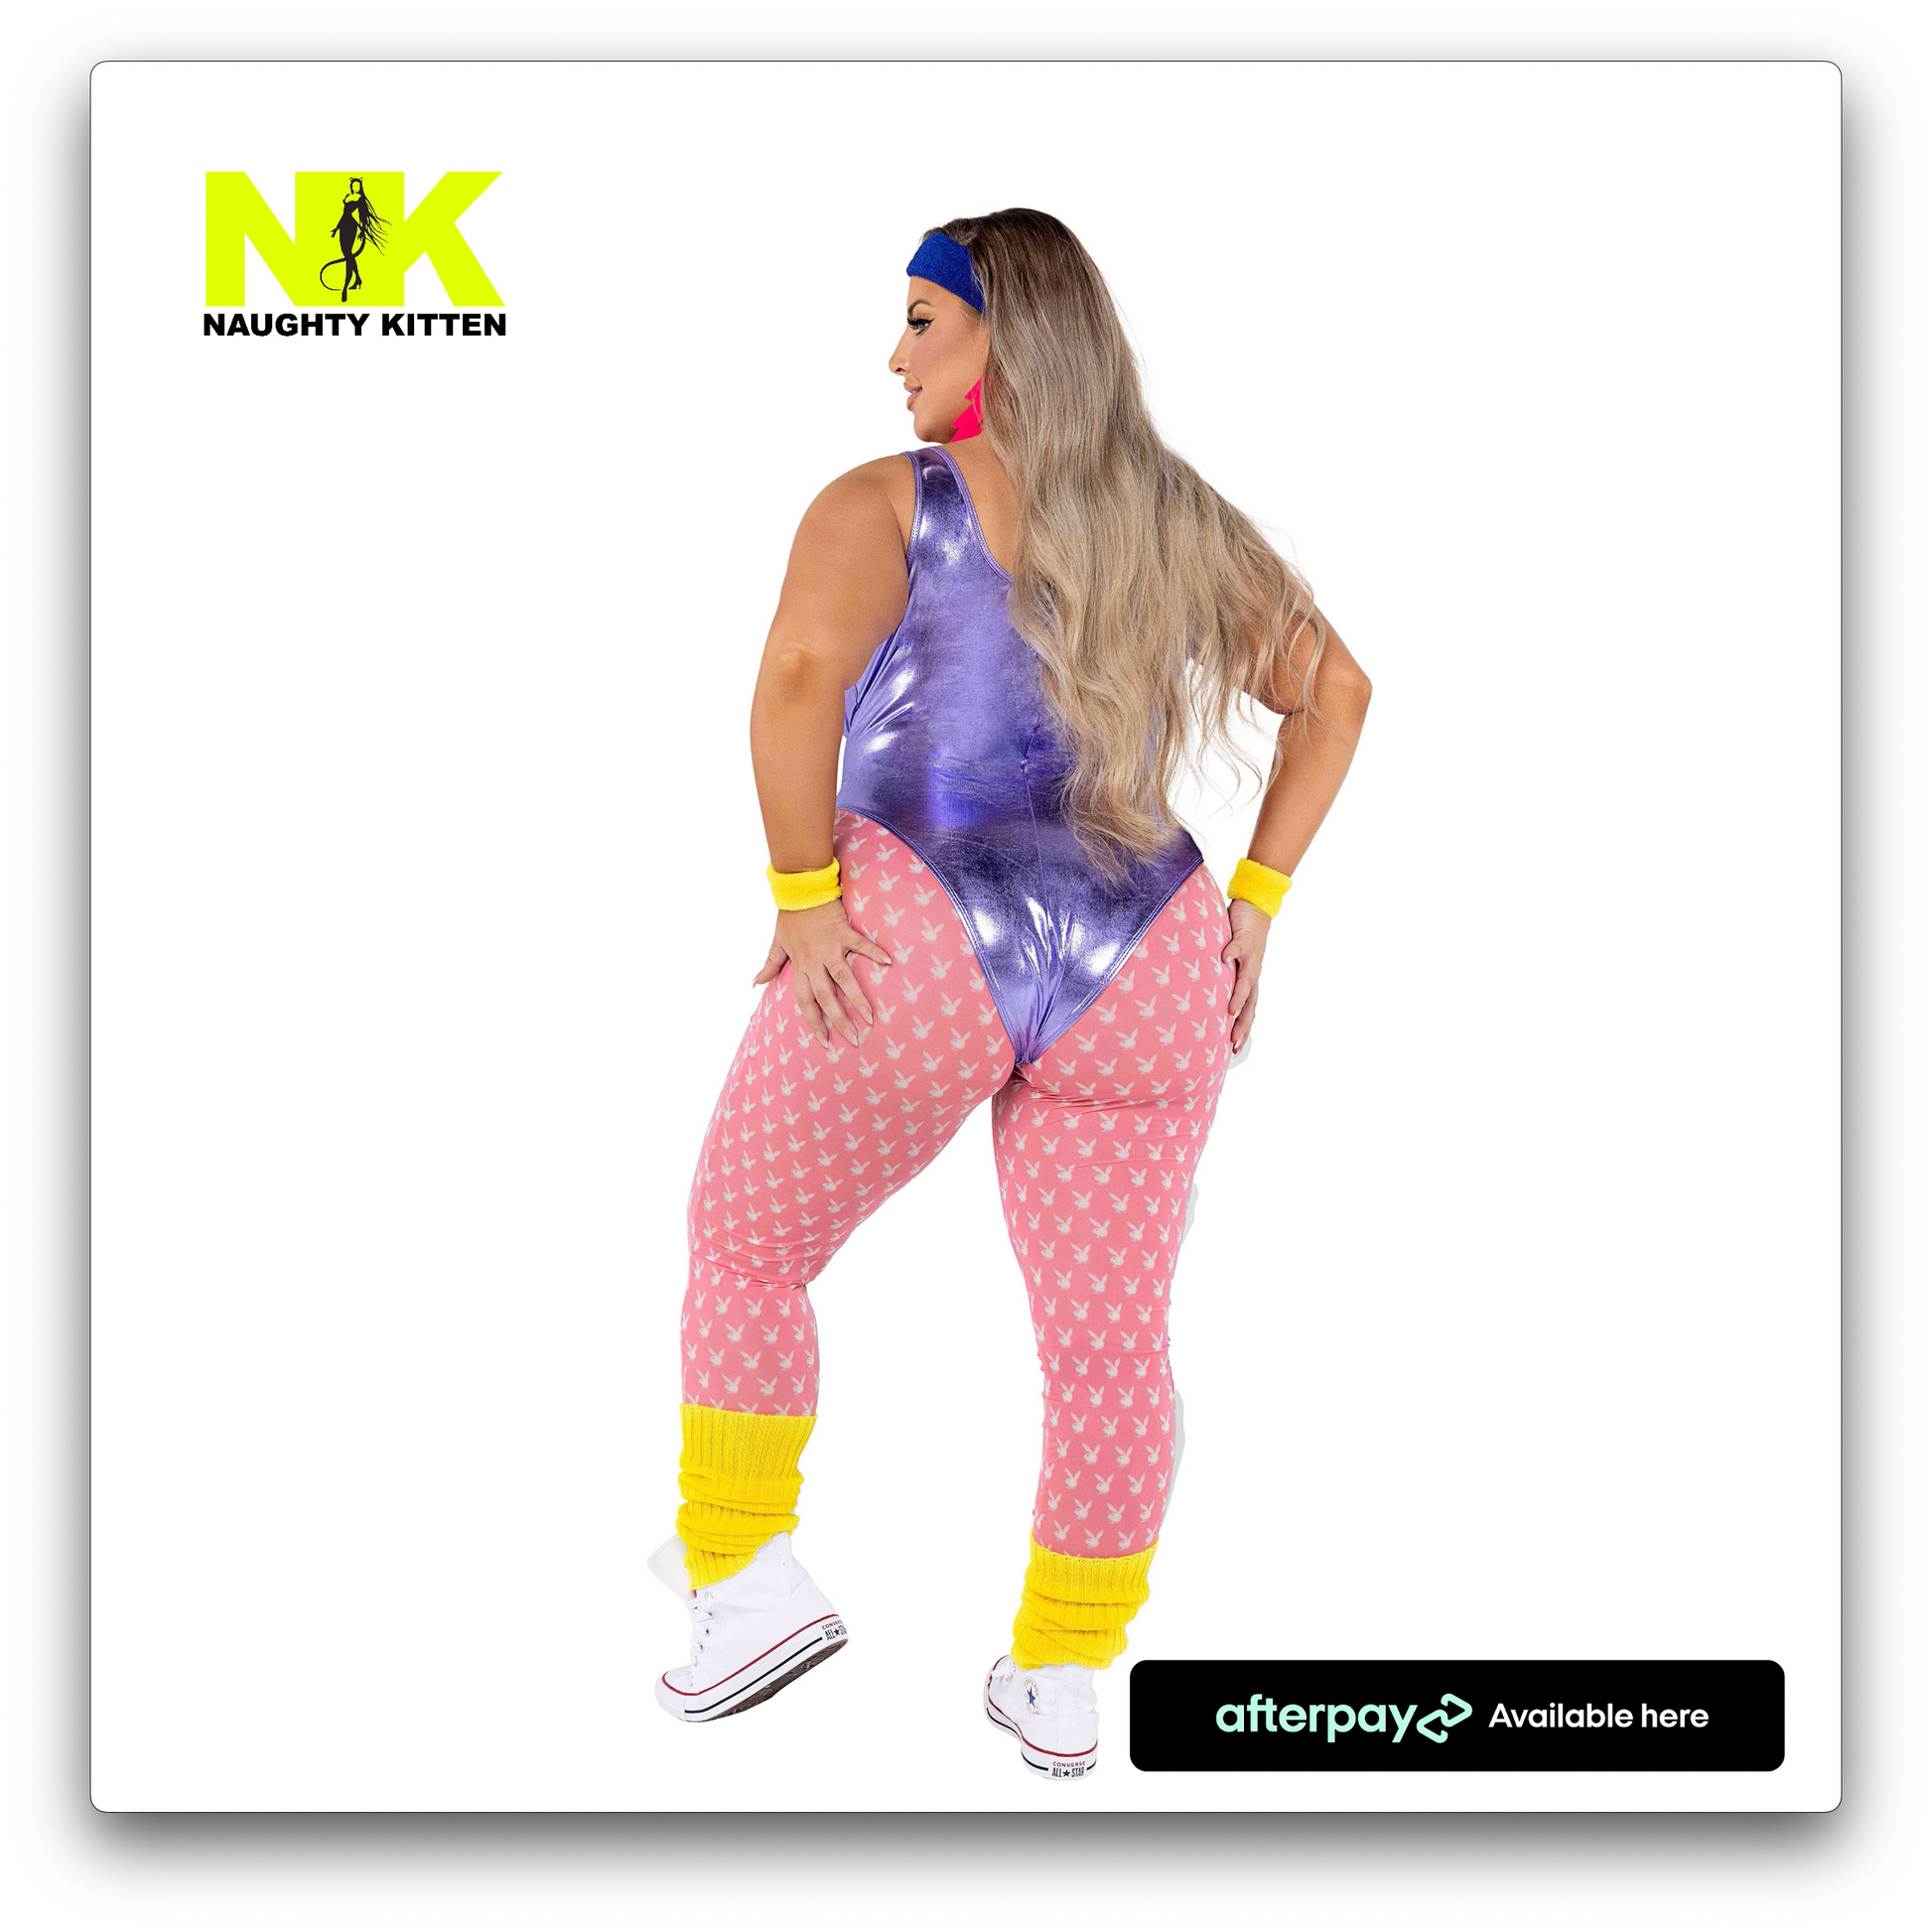 Naughty Kitten Clothing Playboy 80's Fitness Costume Back Rear View Playboy Costume Plus Size